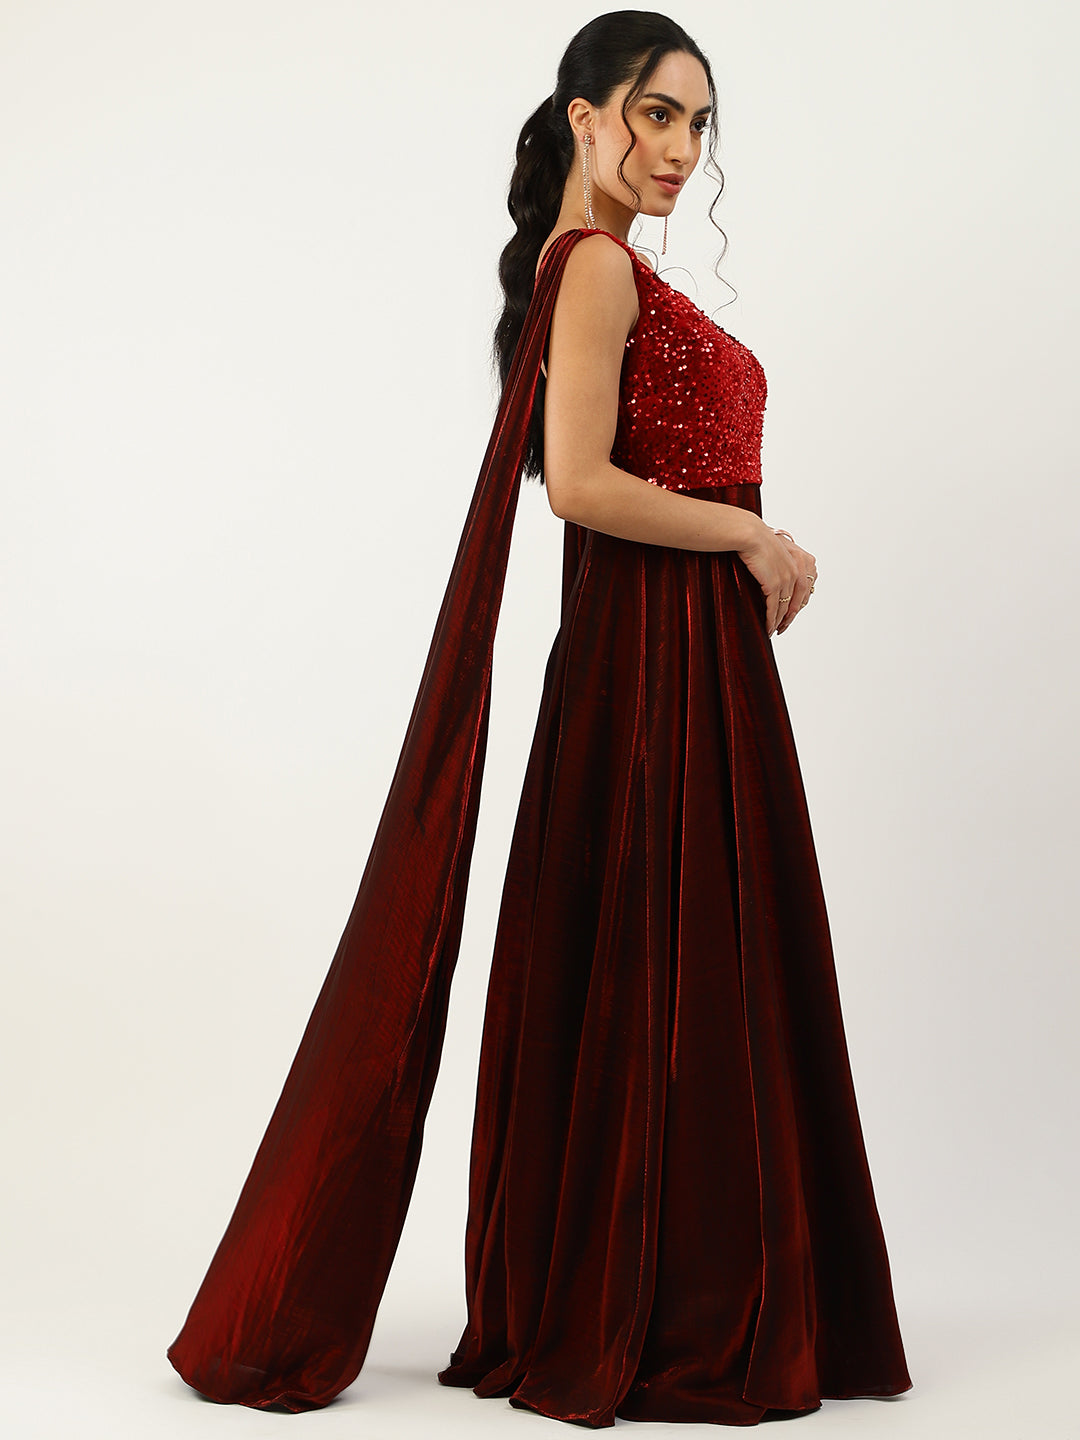 Chaheli Party Wear Gown | Traditional Party Wear Long Dress